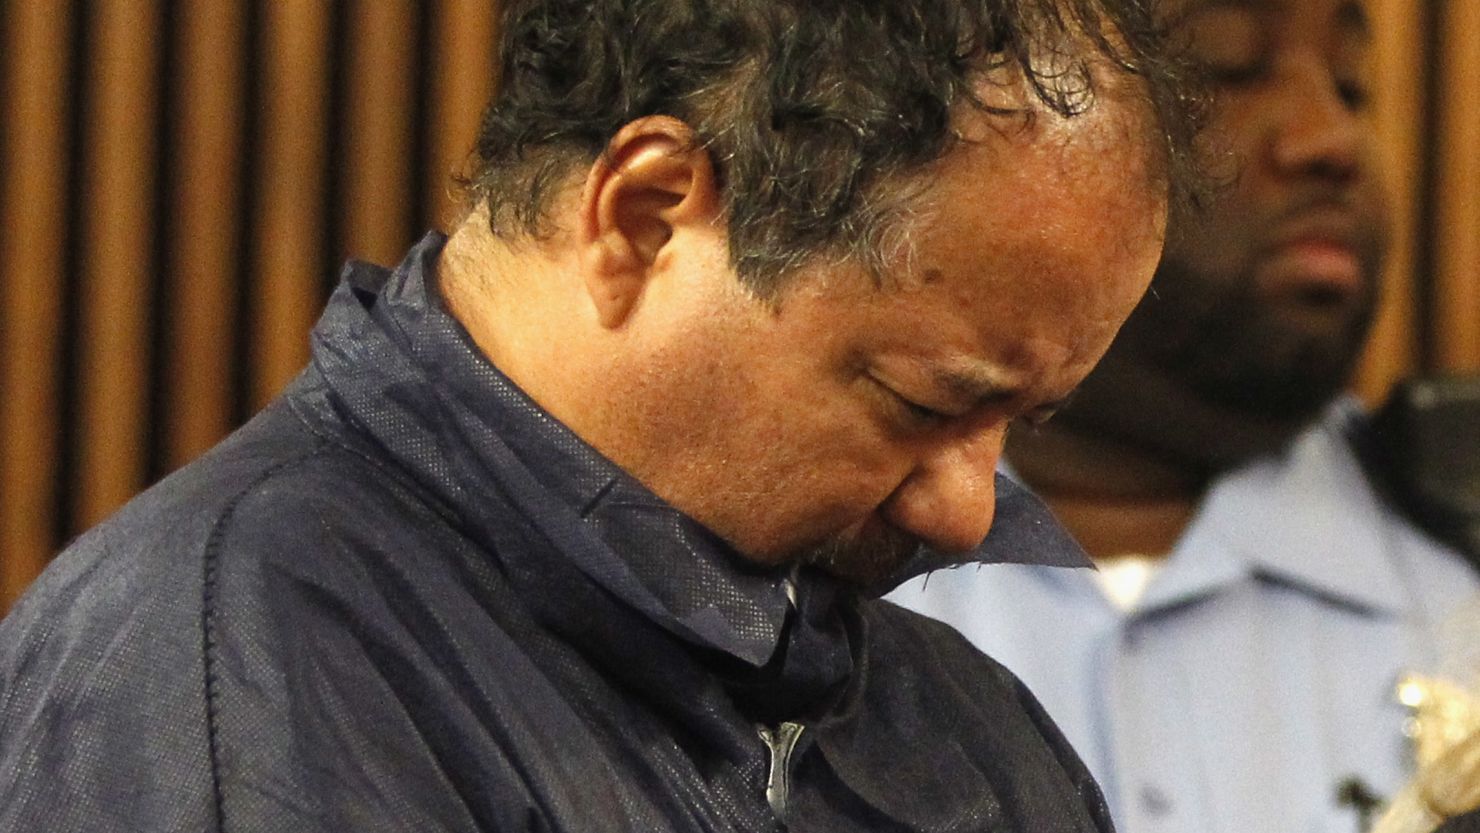 Ariel Castro stands with his head down during his arraignment on kidnapping and rape charges on May 9 in Cleveland, Ohio.